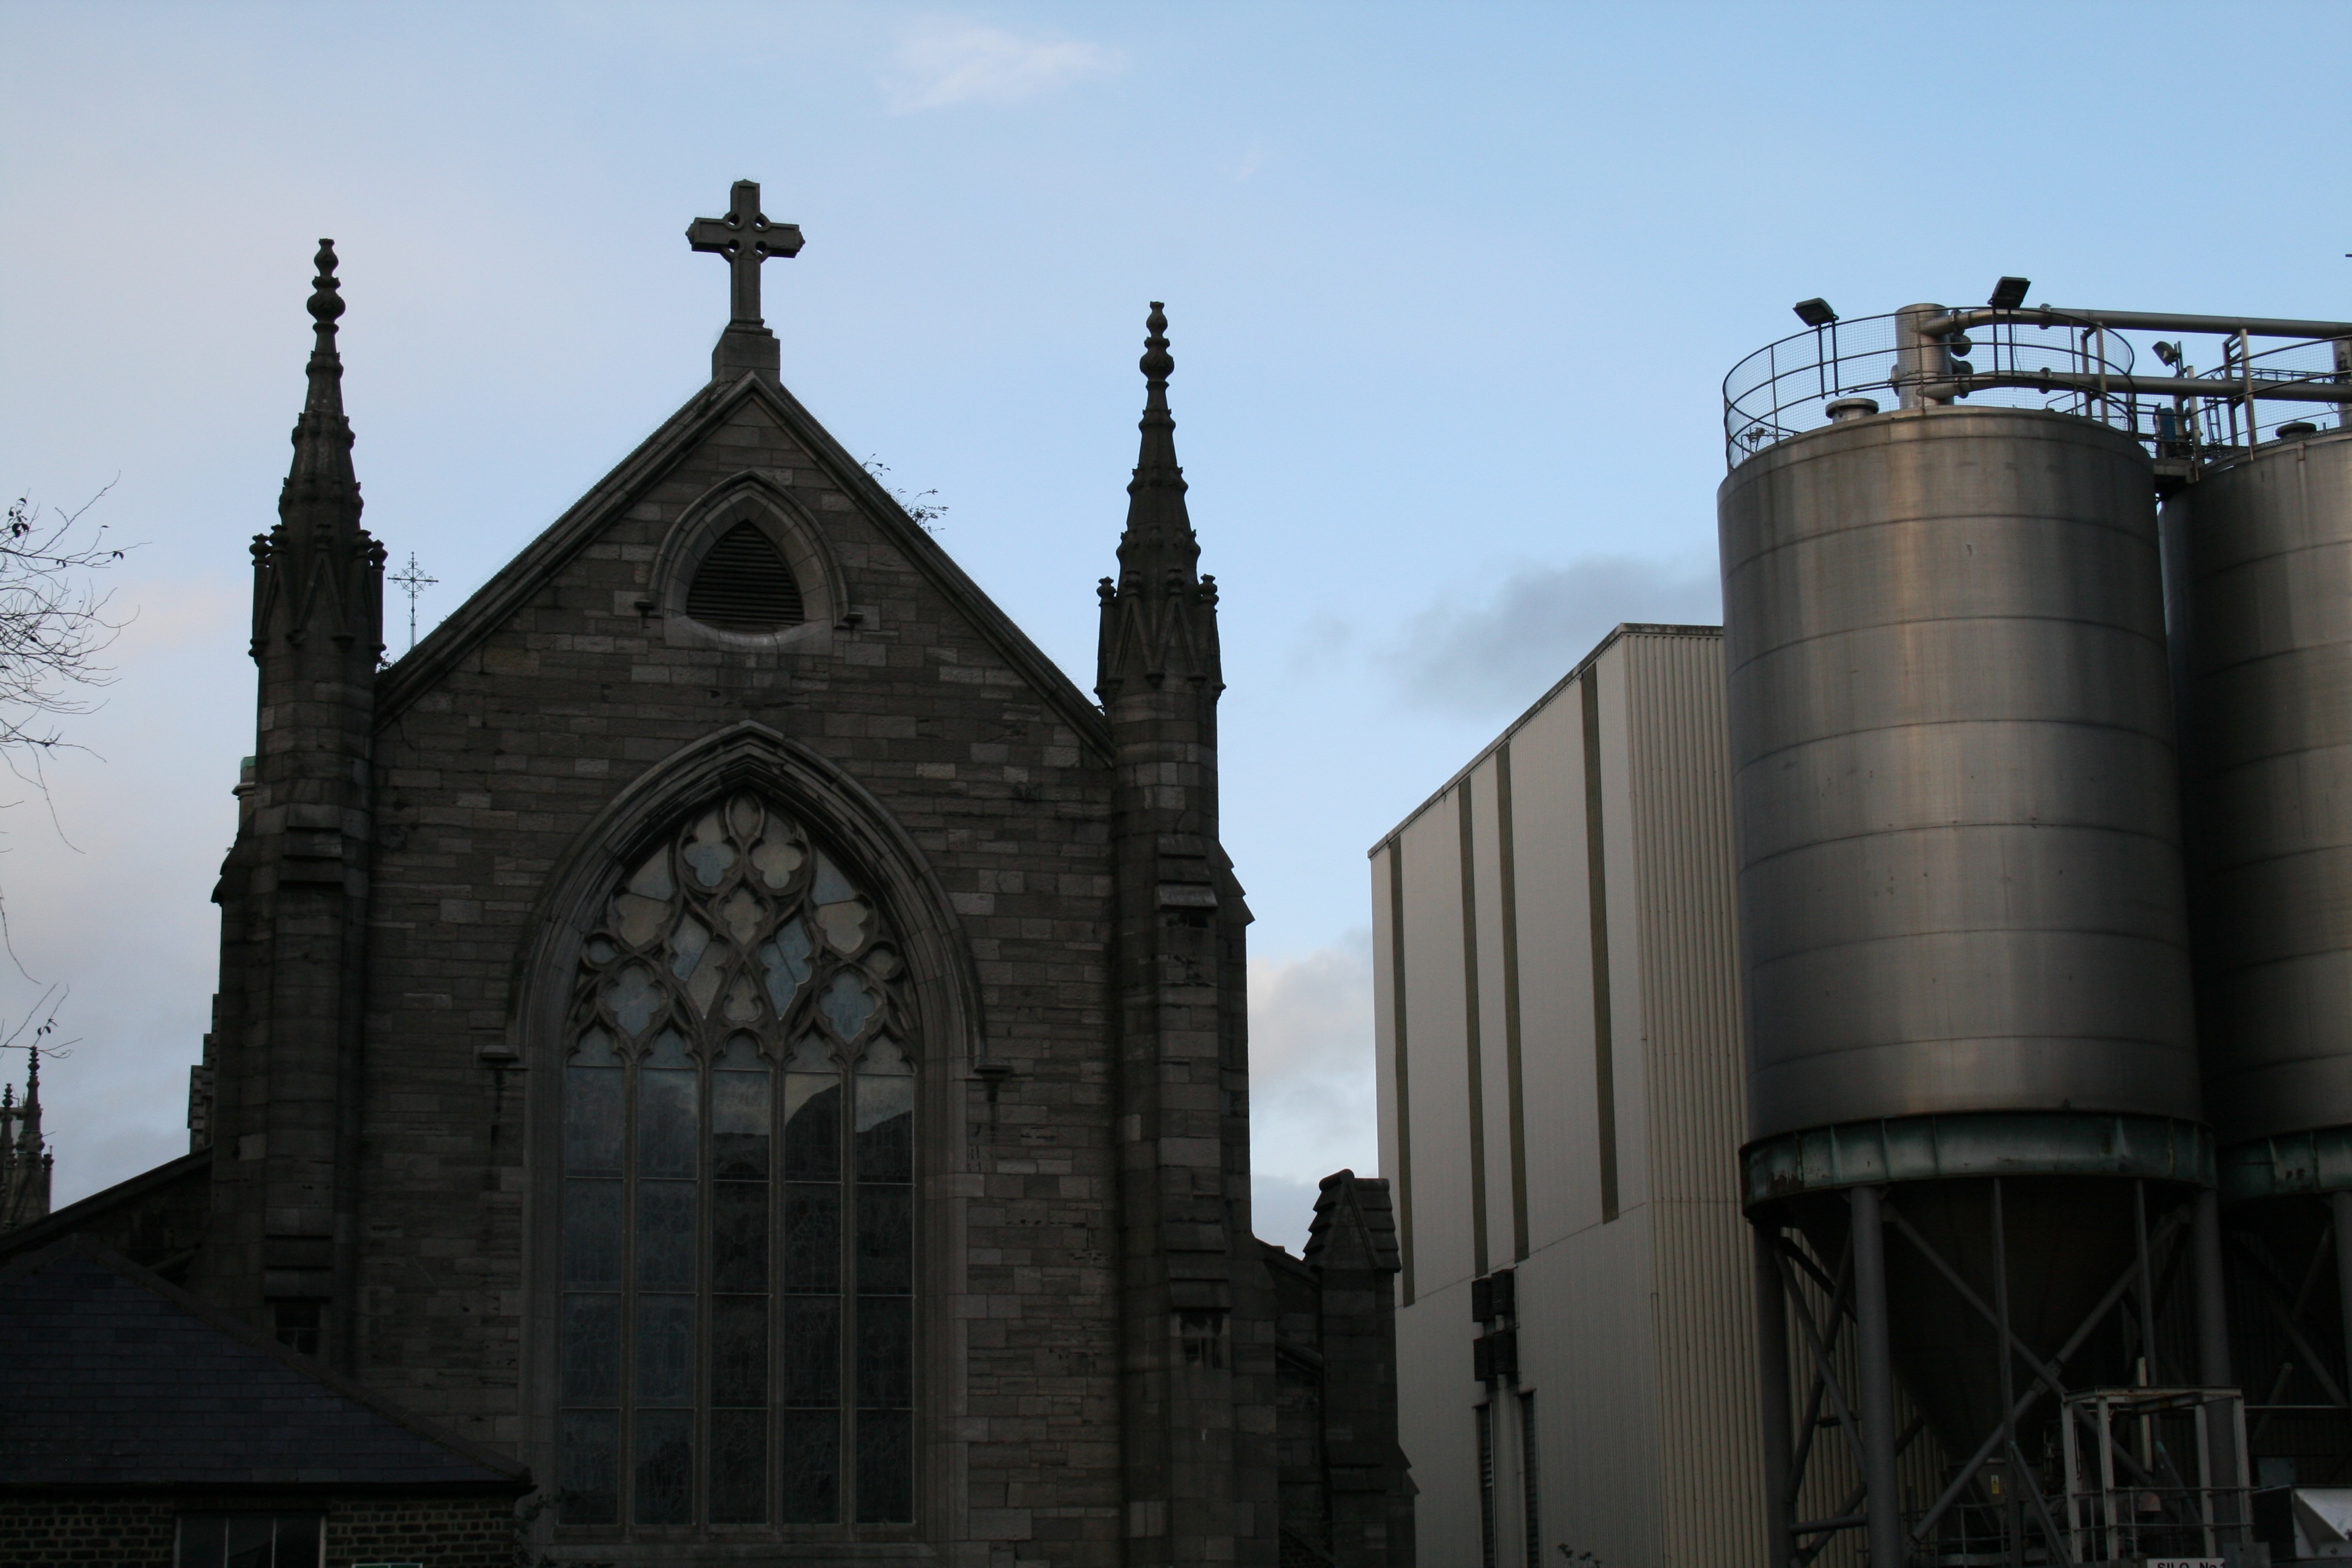 St. James Church sits next to the Guinness Brewery.